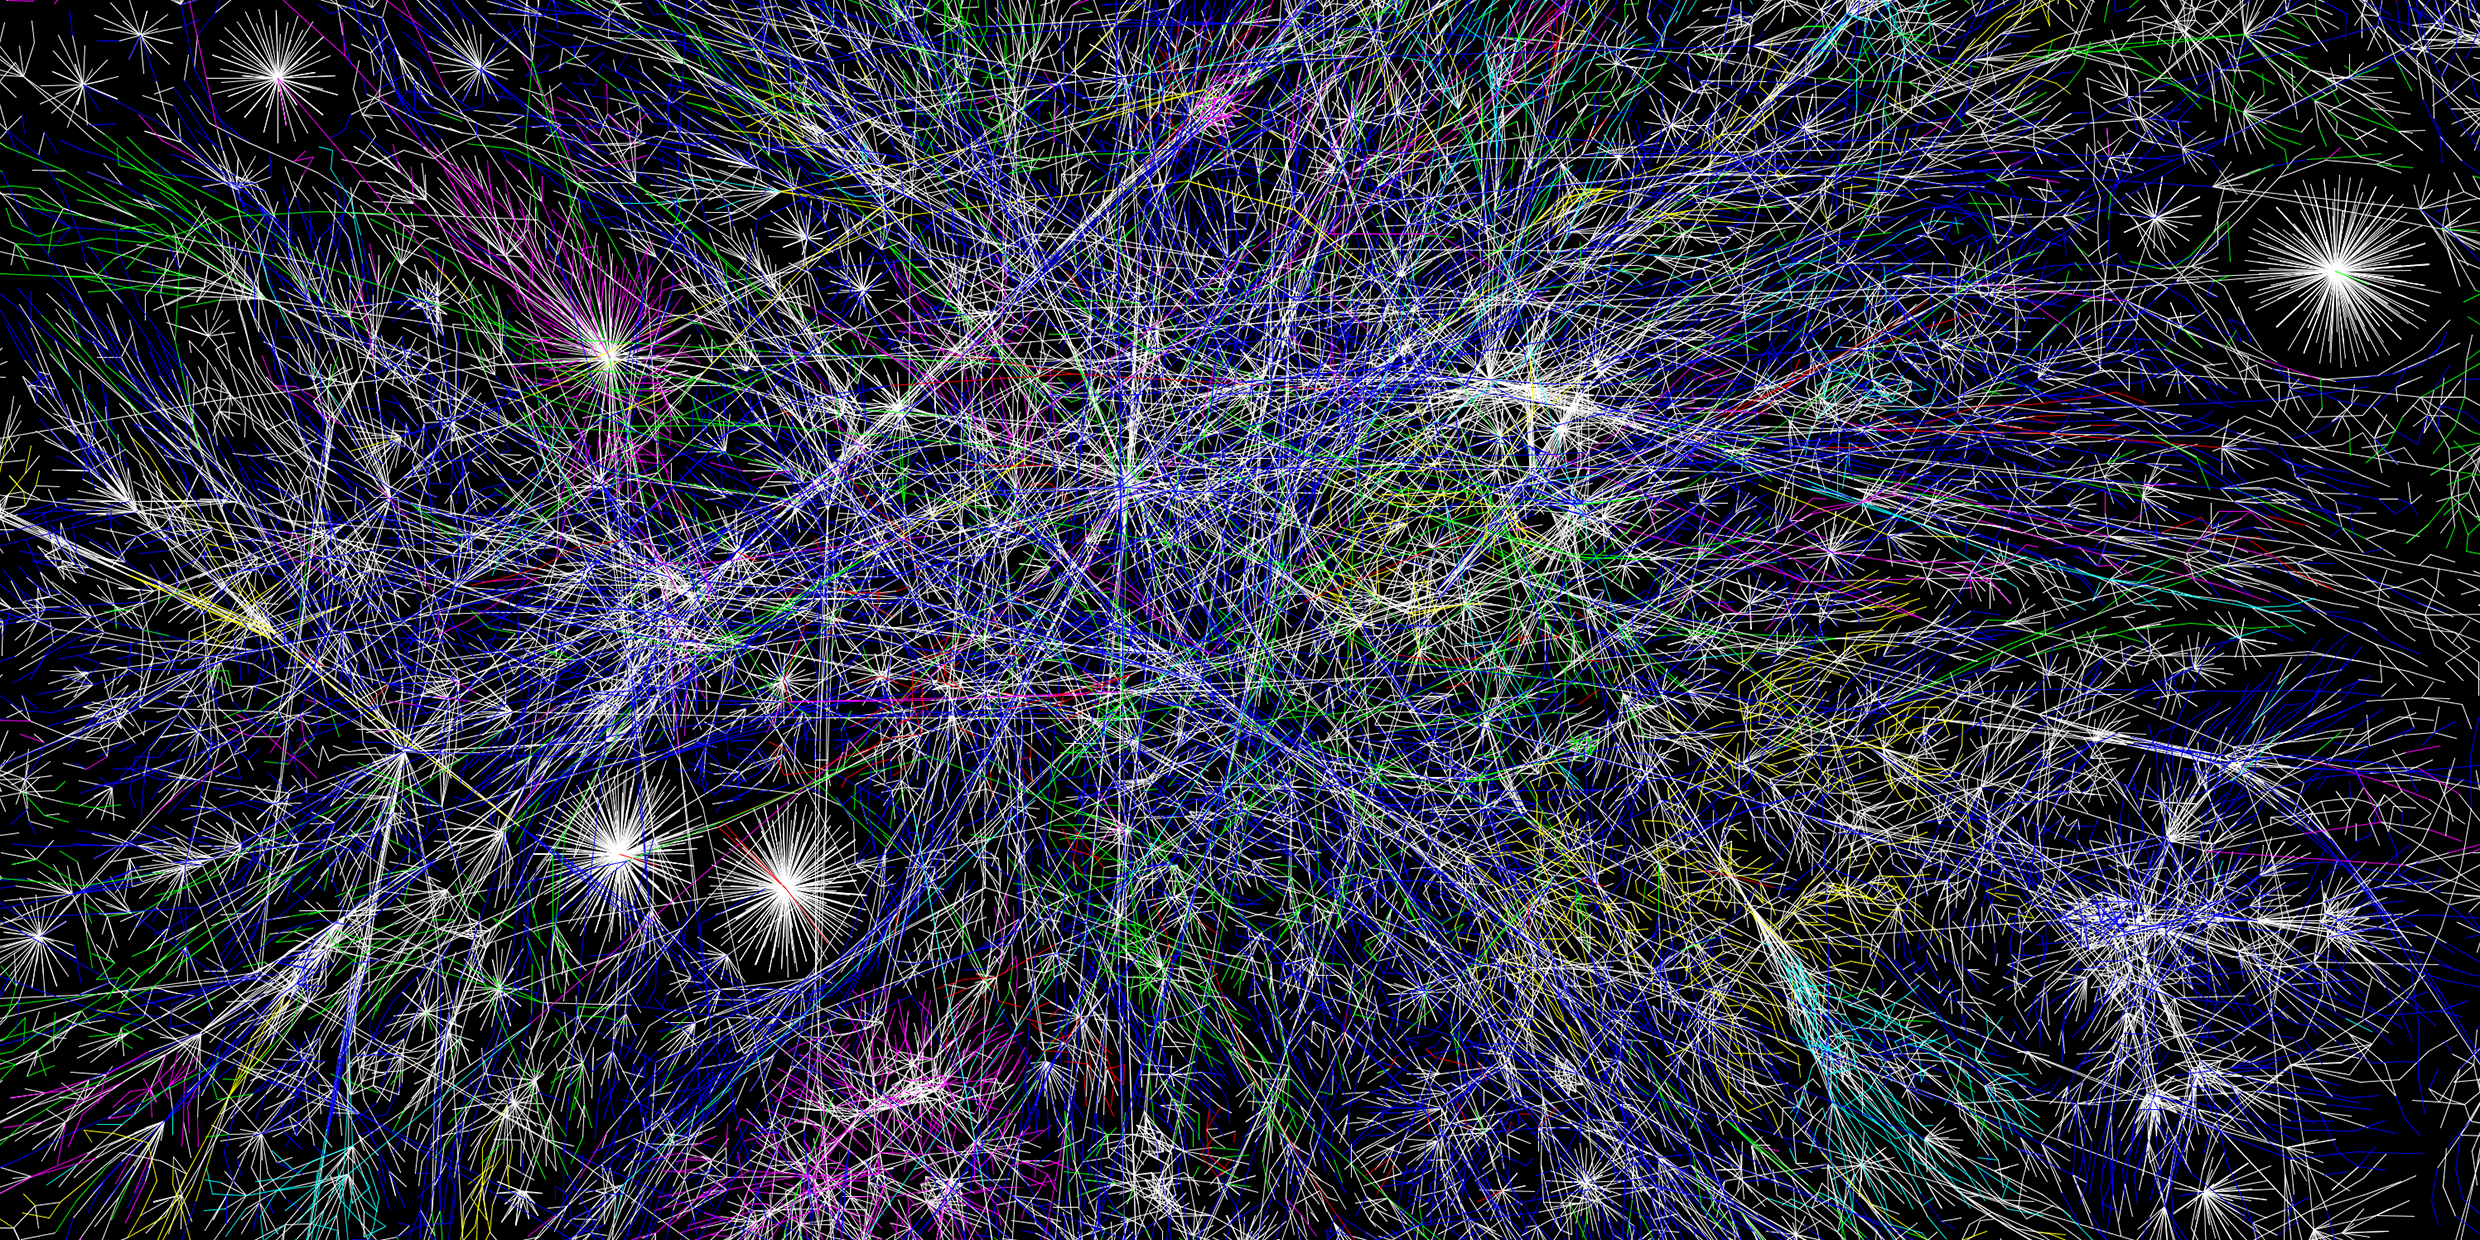 Image of a complex network of connecting lines on a dark background